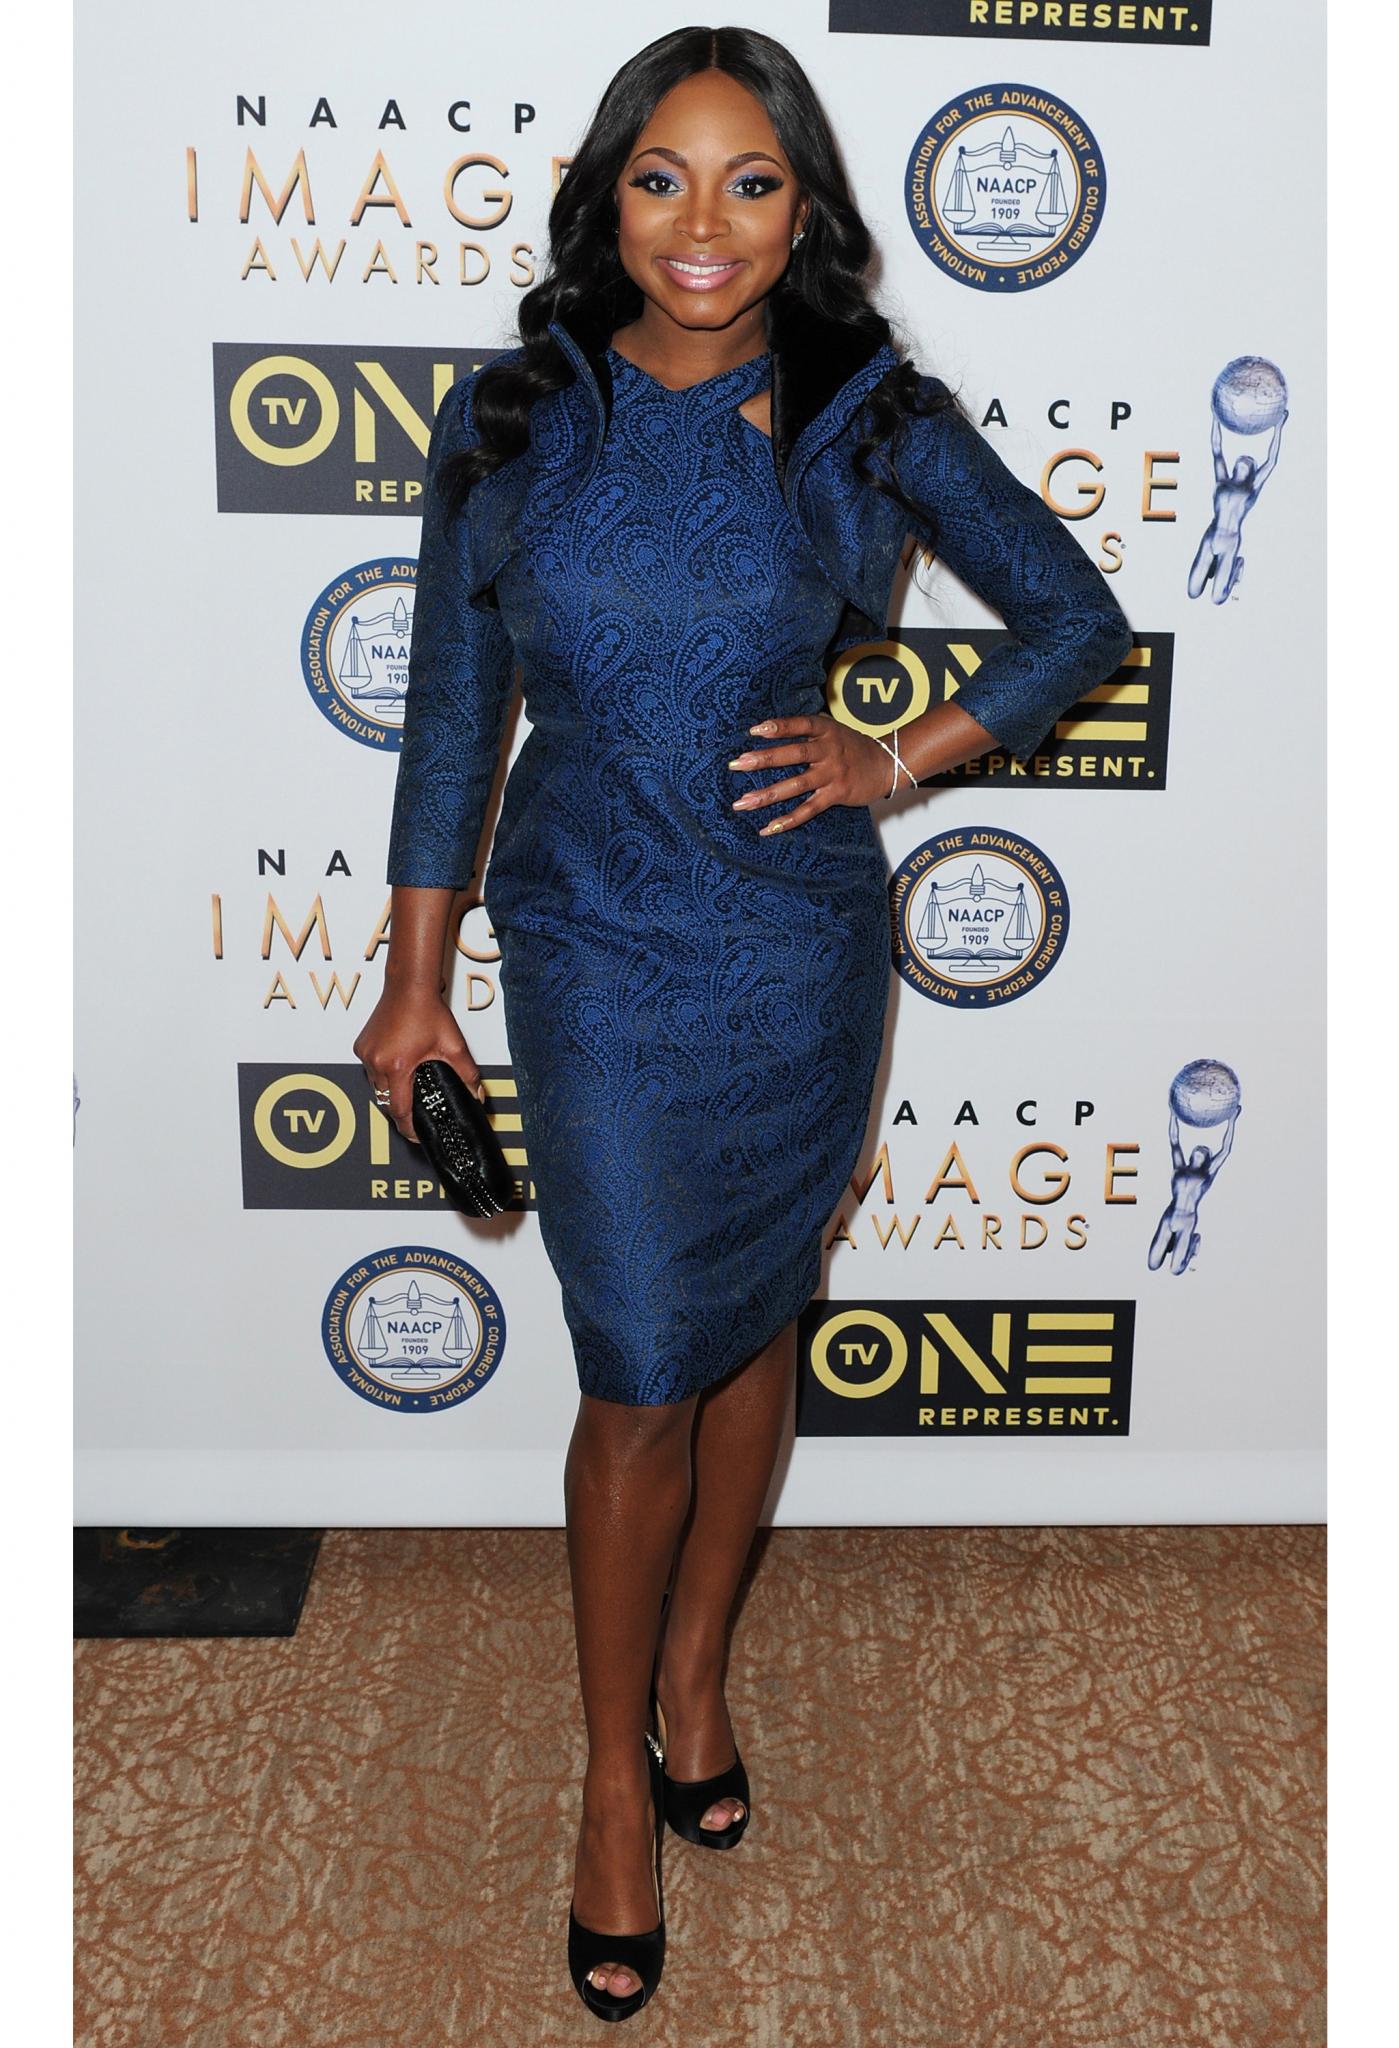 A Look Inside the 47th NAACP Image Awards Nominees' Luncheon
